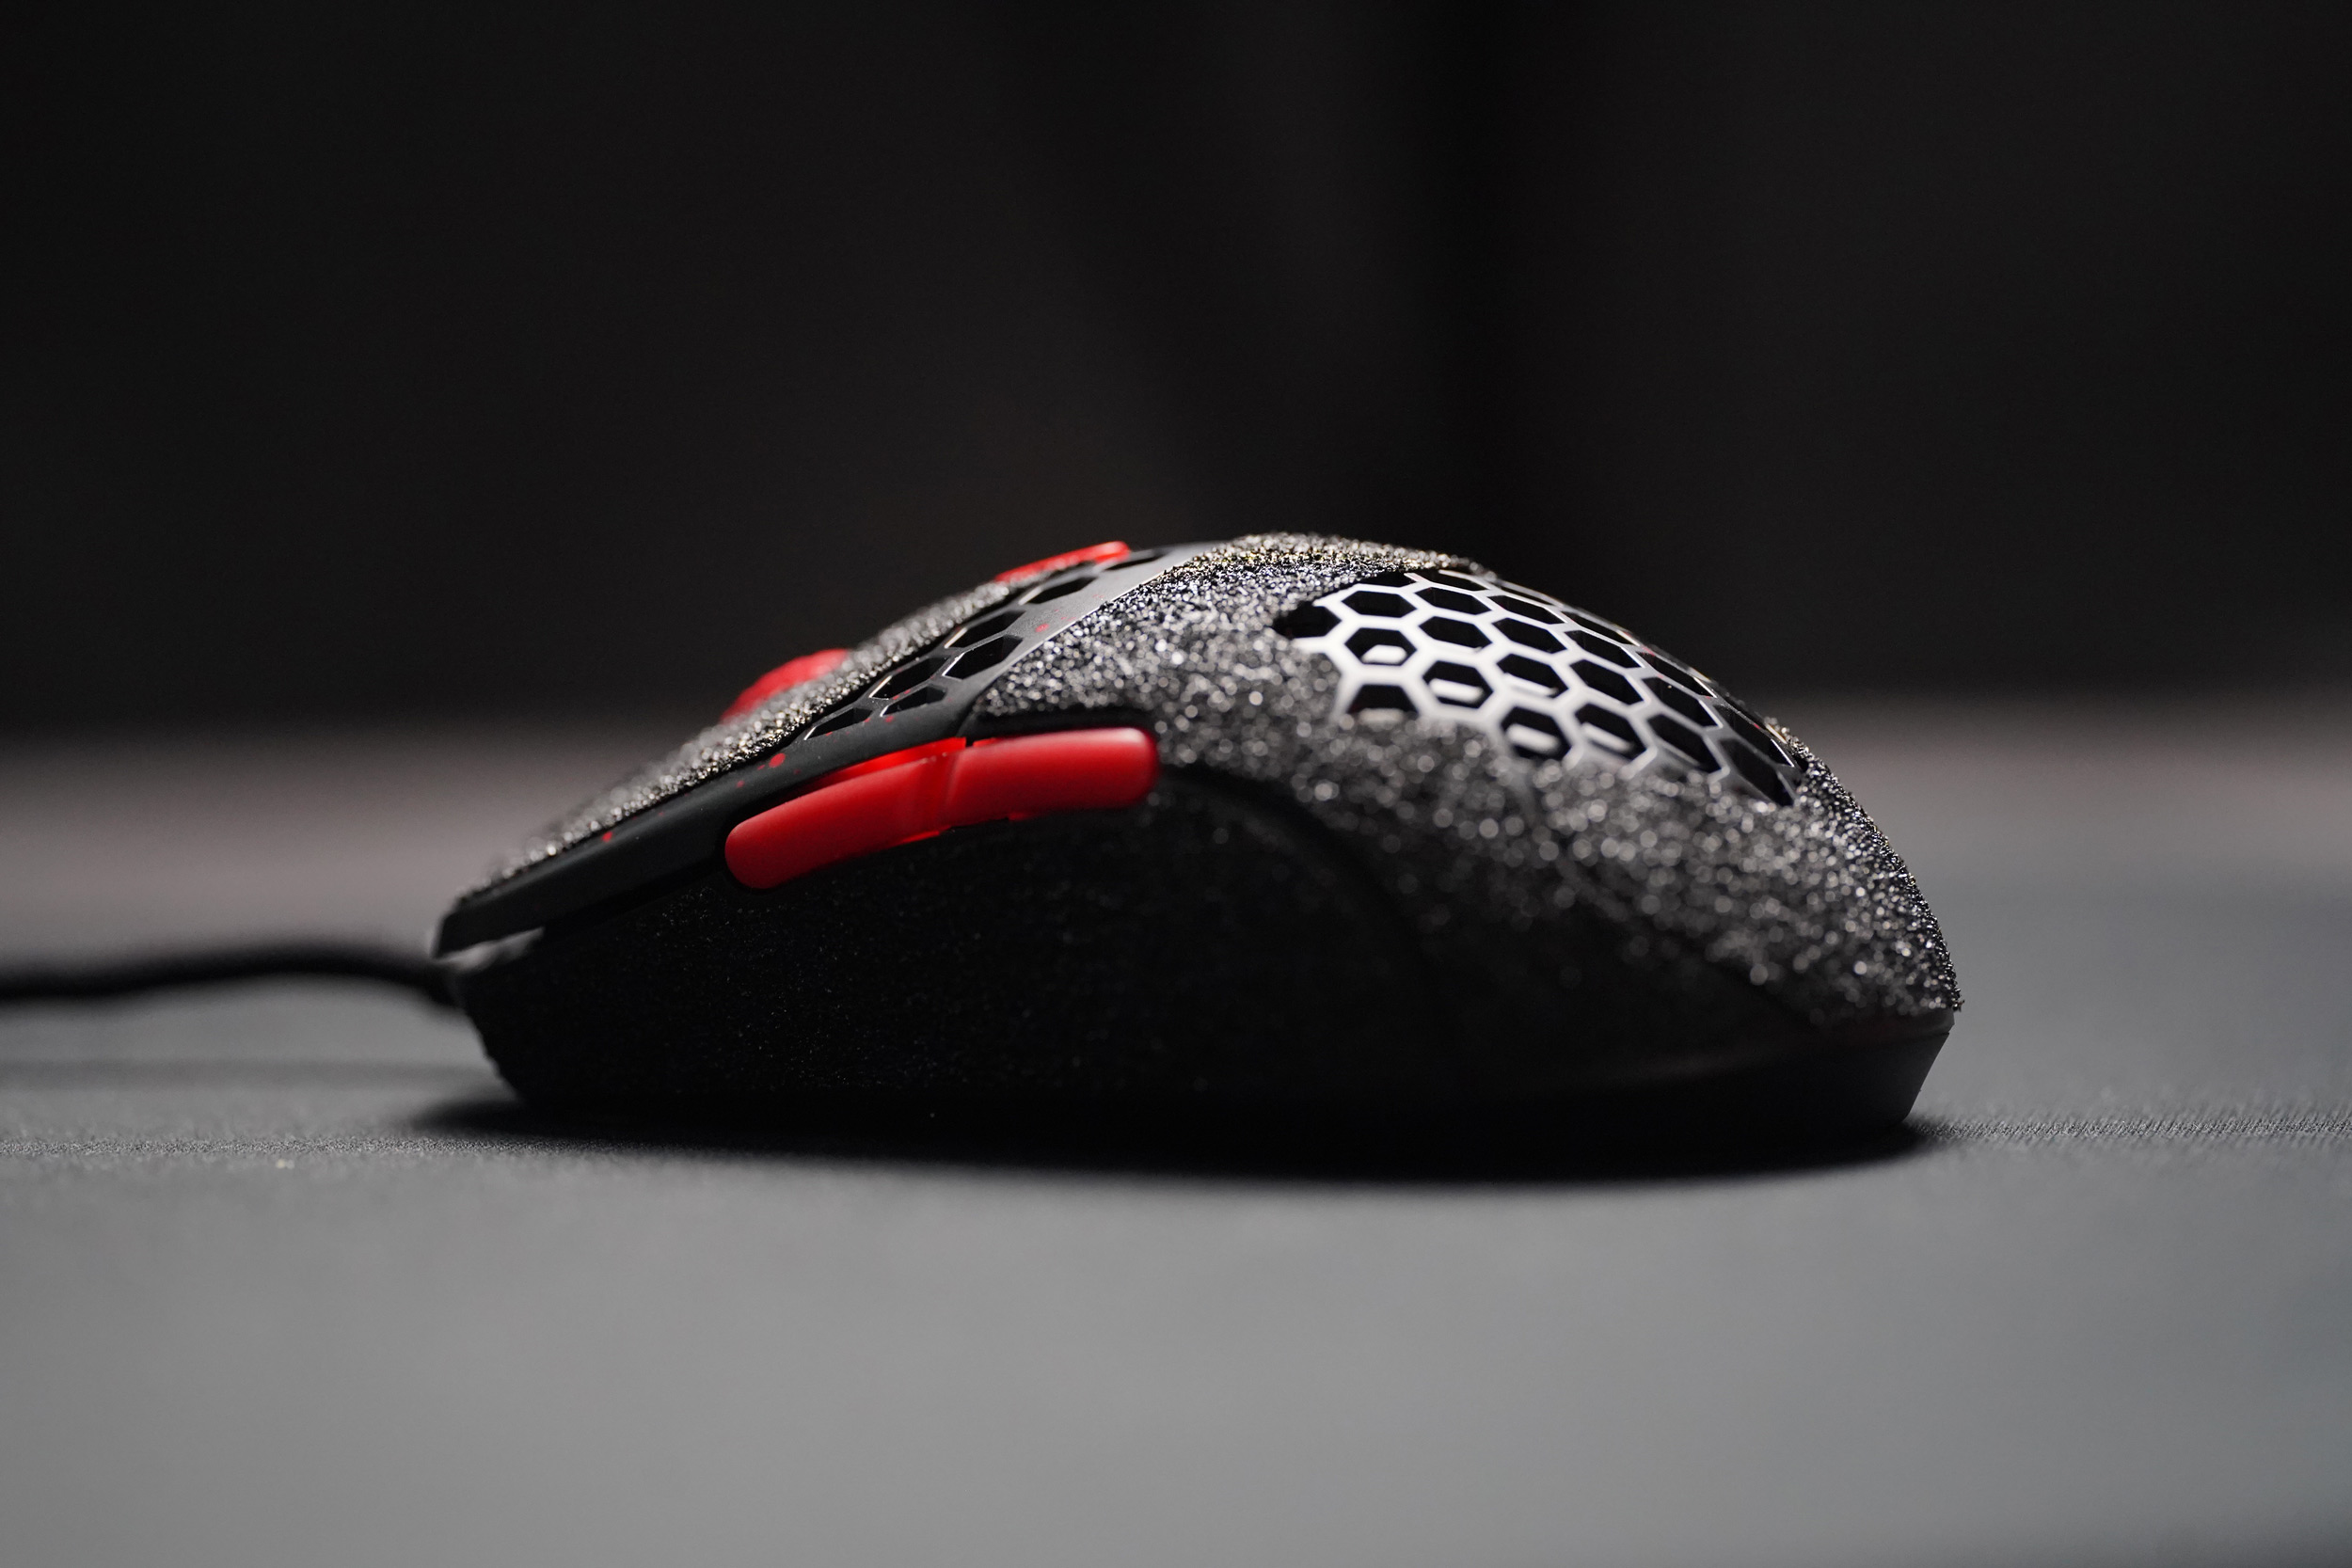 G-Wolves Hati HT-S • Antgrip - Upgrade your gaming mouse.